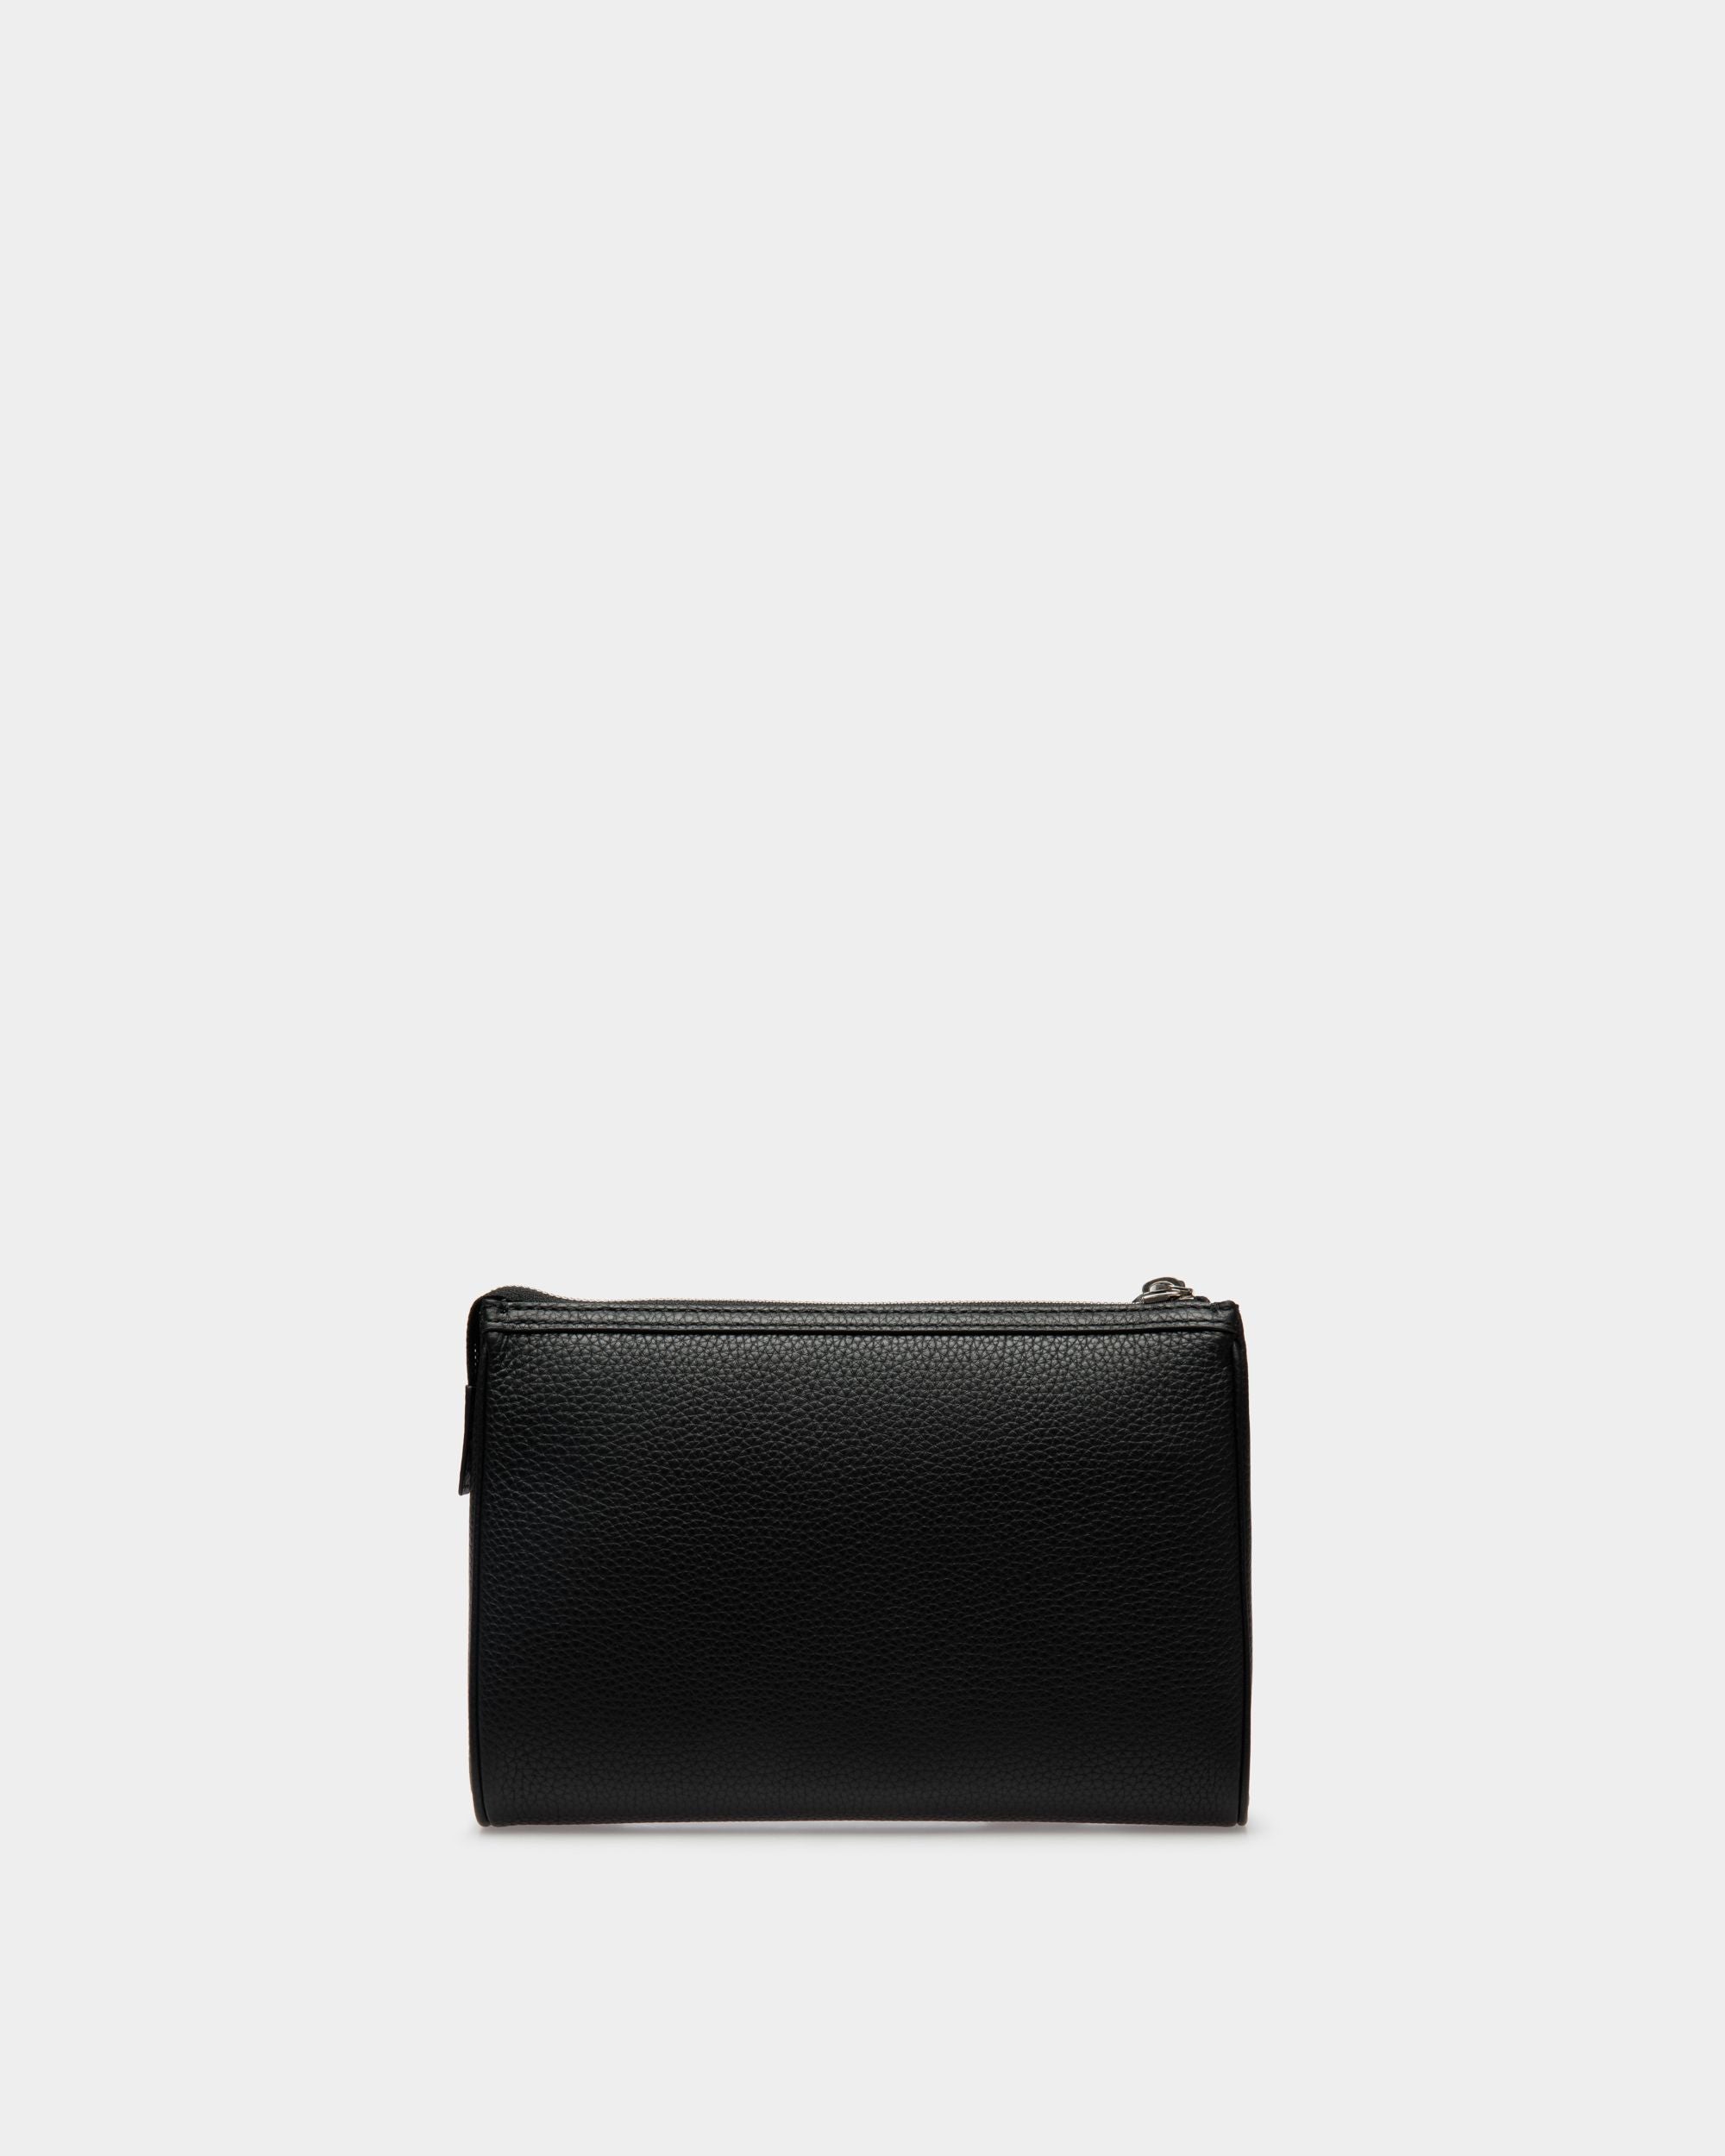 Code | Men's Pouch in Black Grained Leather | Bally | Still Life Back